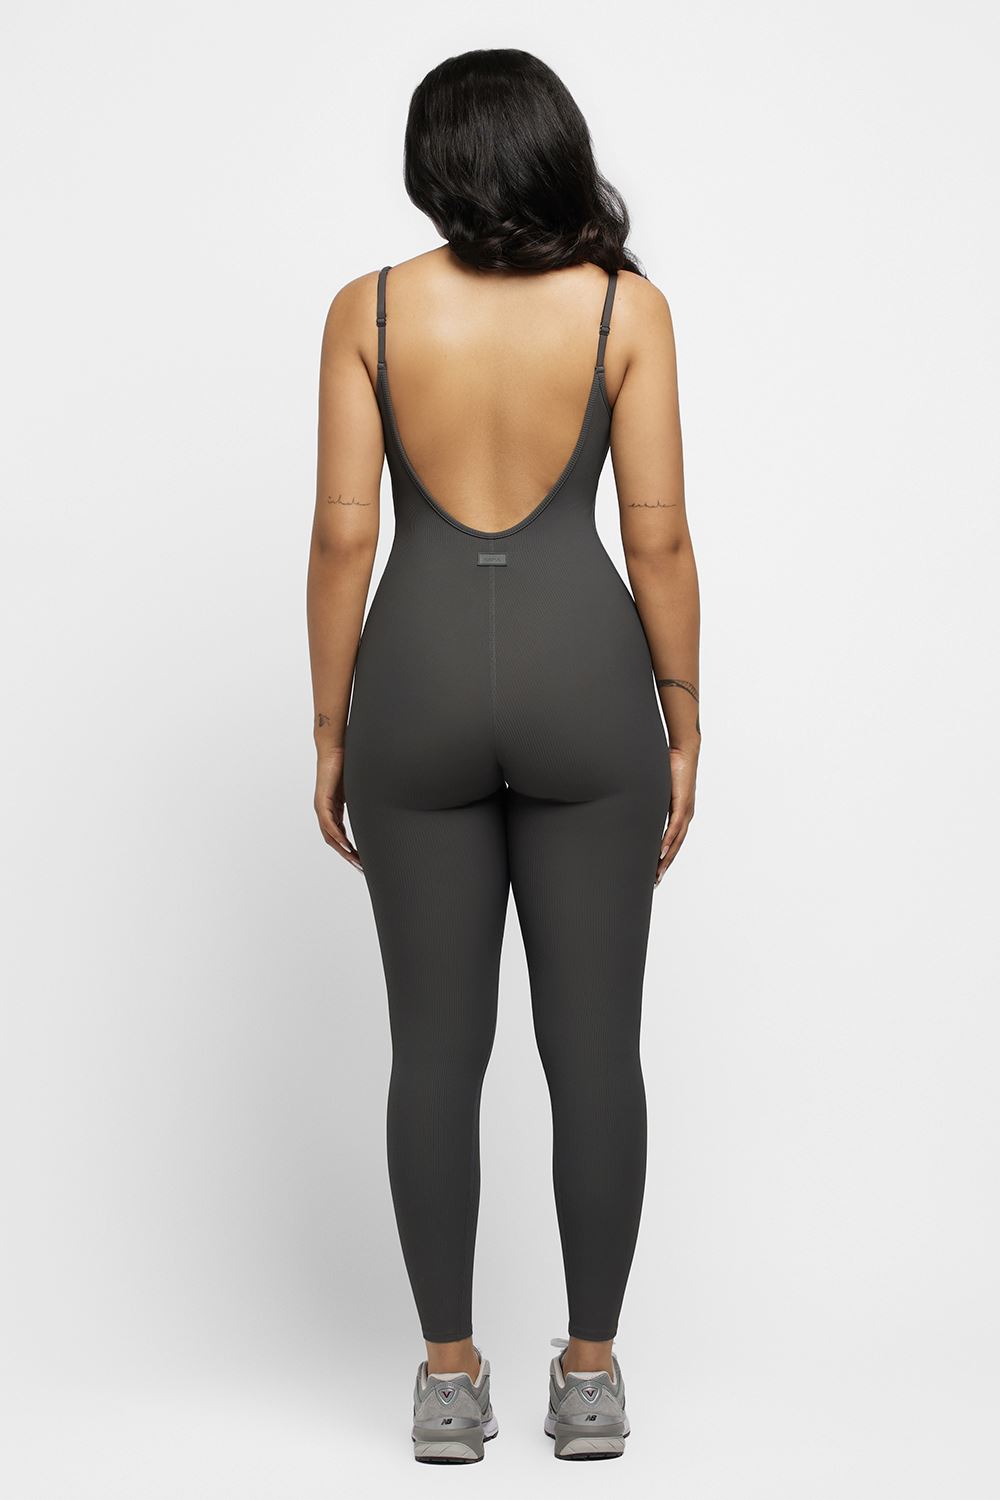 Nike Yoga Jumpsuit Pink Size XS - $52 (30% Off Retail) - From Nat